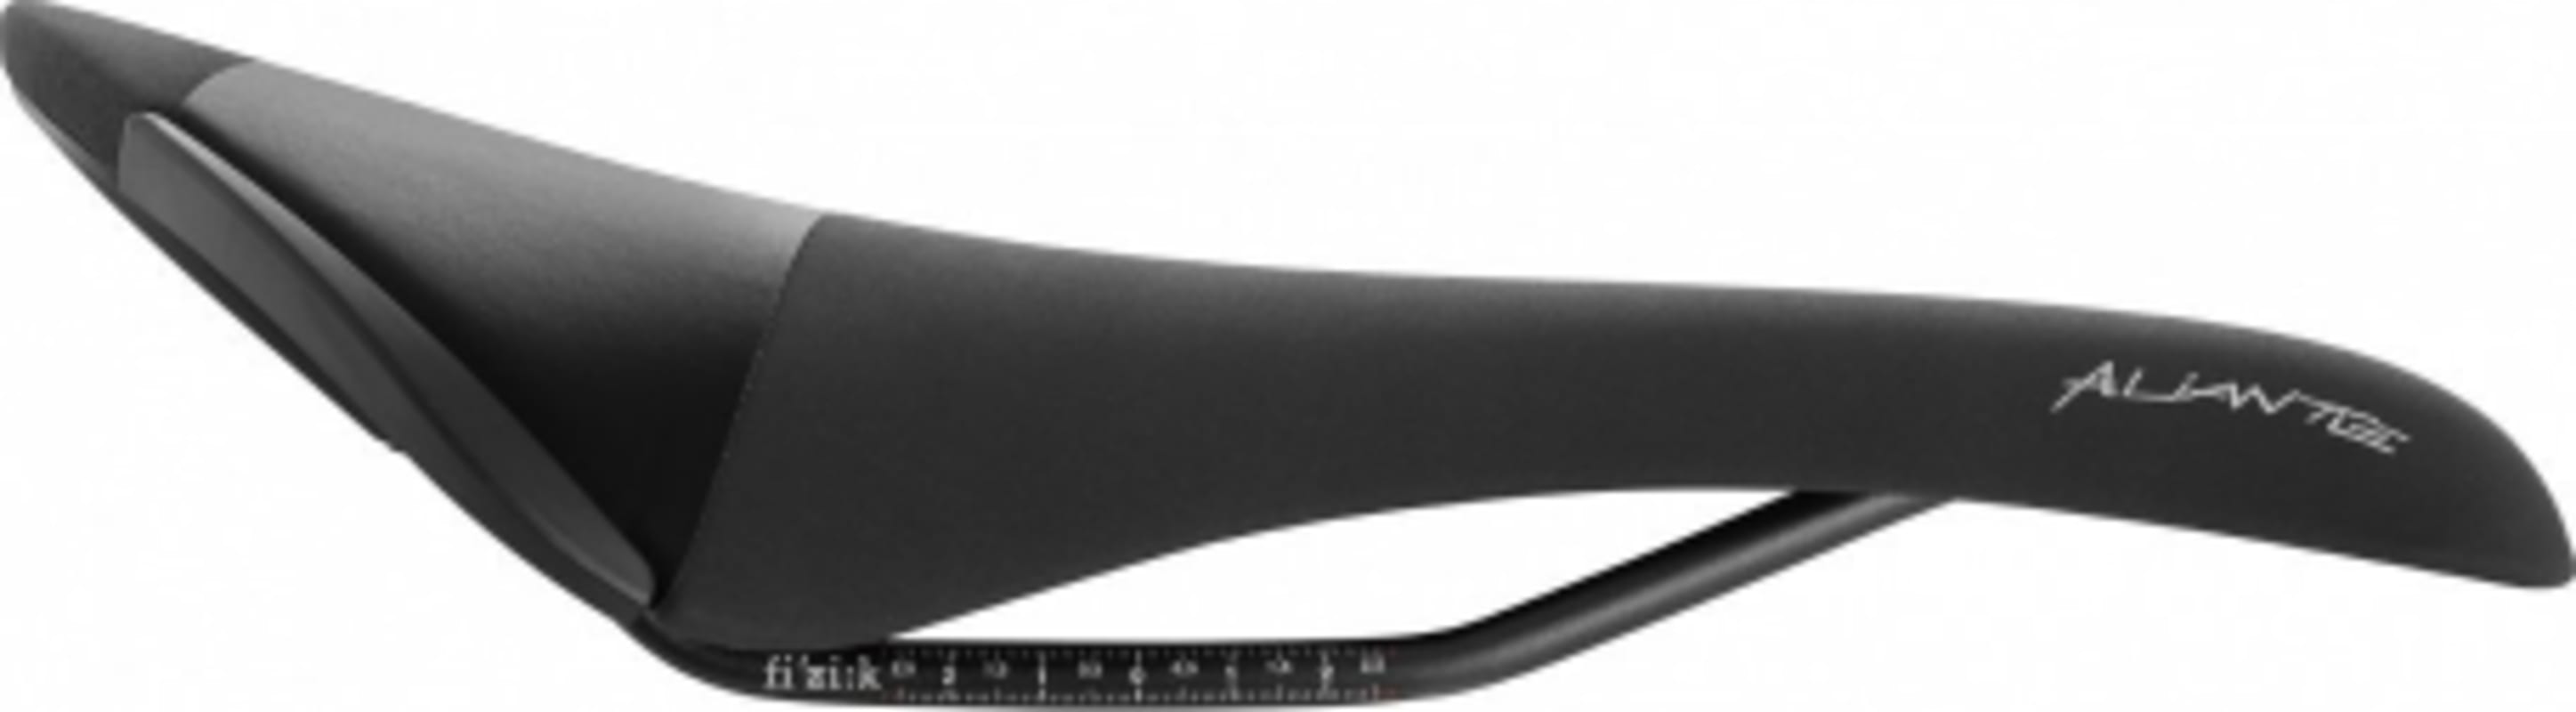 Fizik Aliante R3 Road Cycling Saddle | Great Lakes Outpost